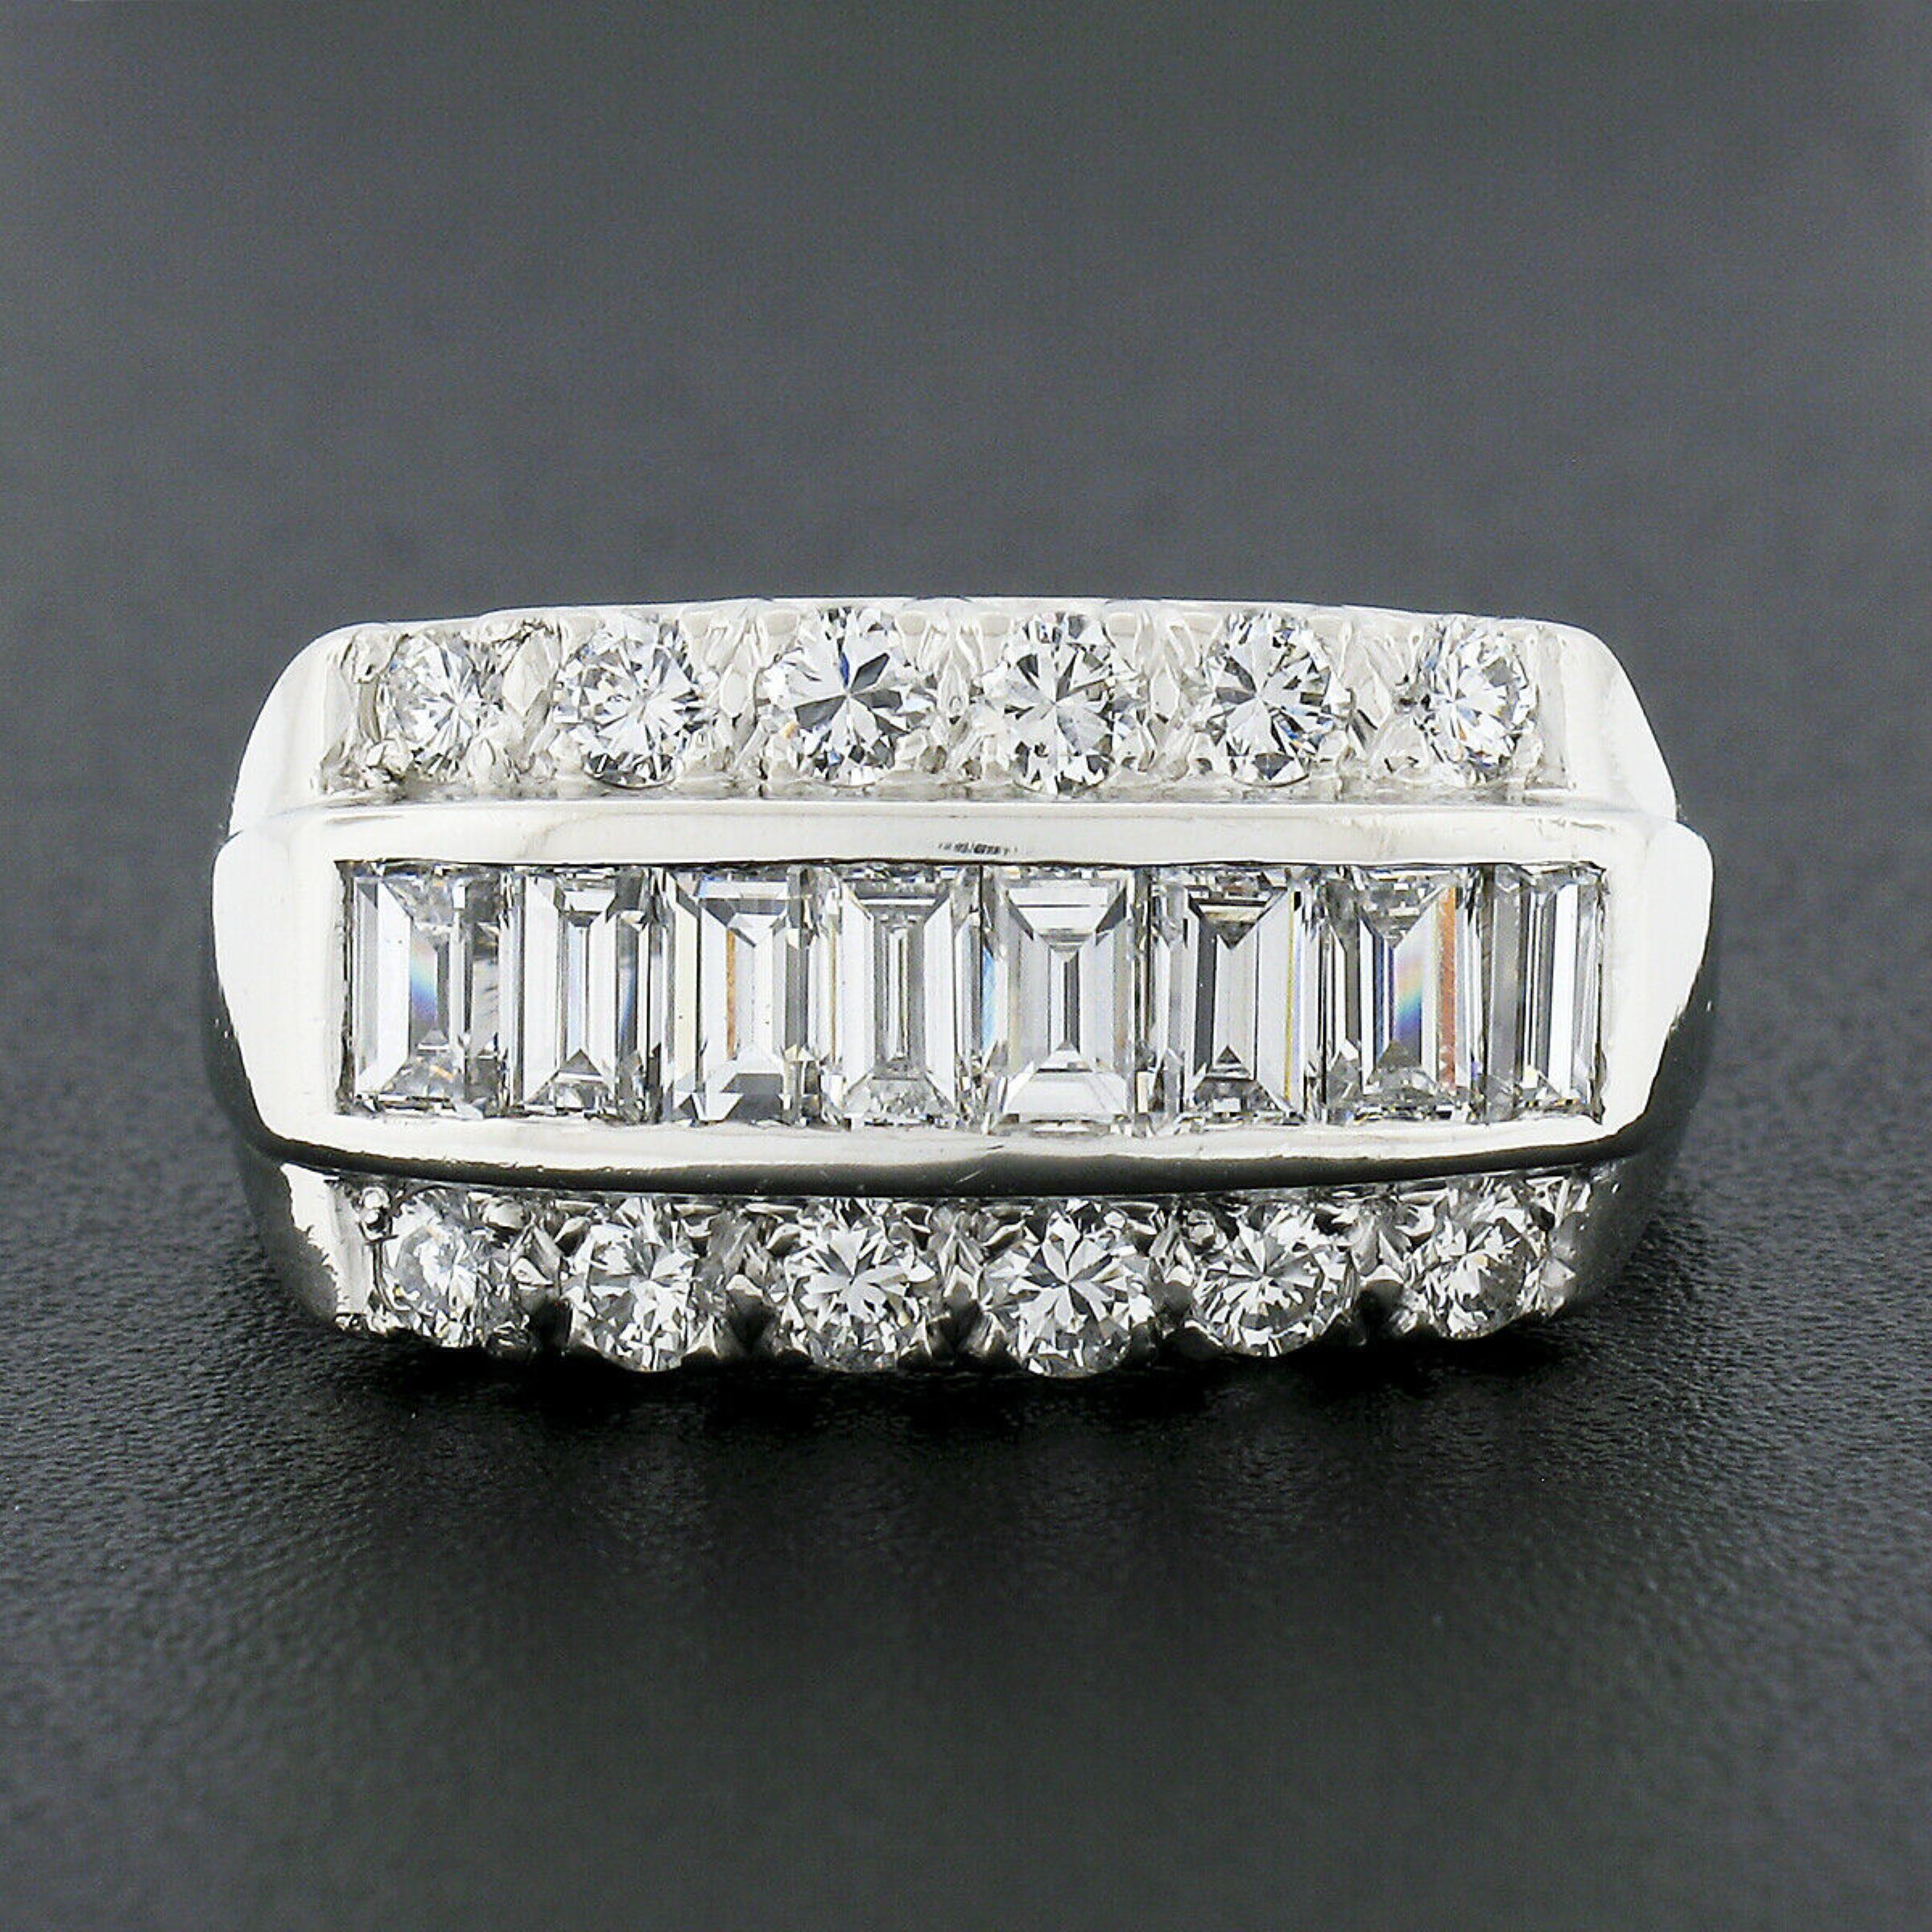 Here we have a stunning, vintage, wide band ring that is crafted from solid platinum featuring approximately 2.15 carats of very fine quality diamonds set in three rows throughout its top. The slightly domed top is neatly channel set with baguette